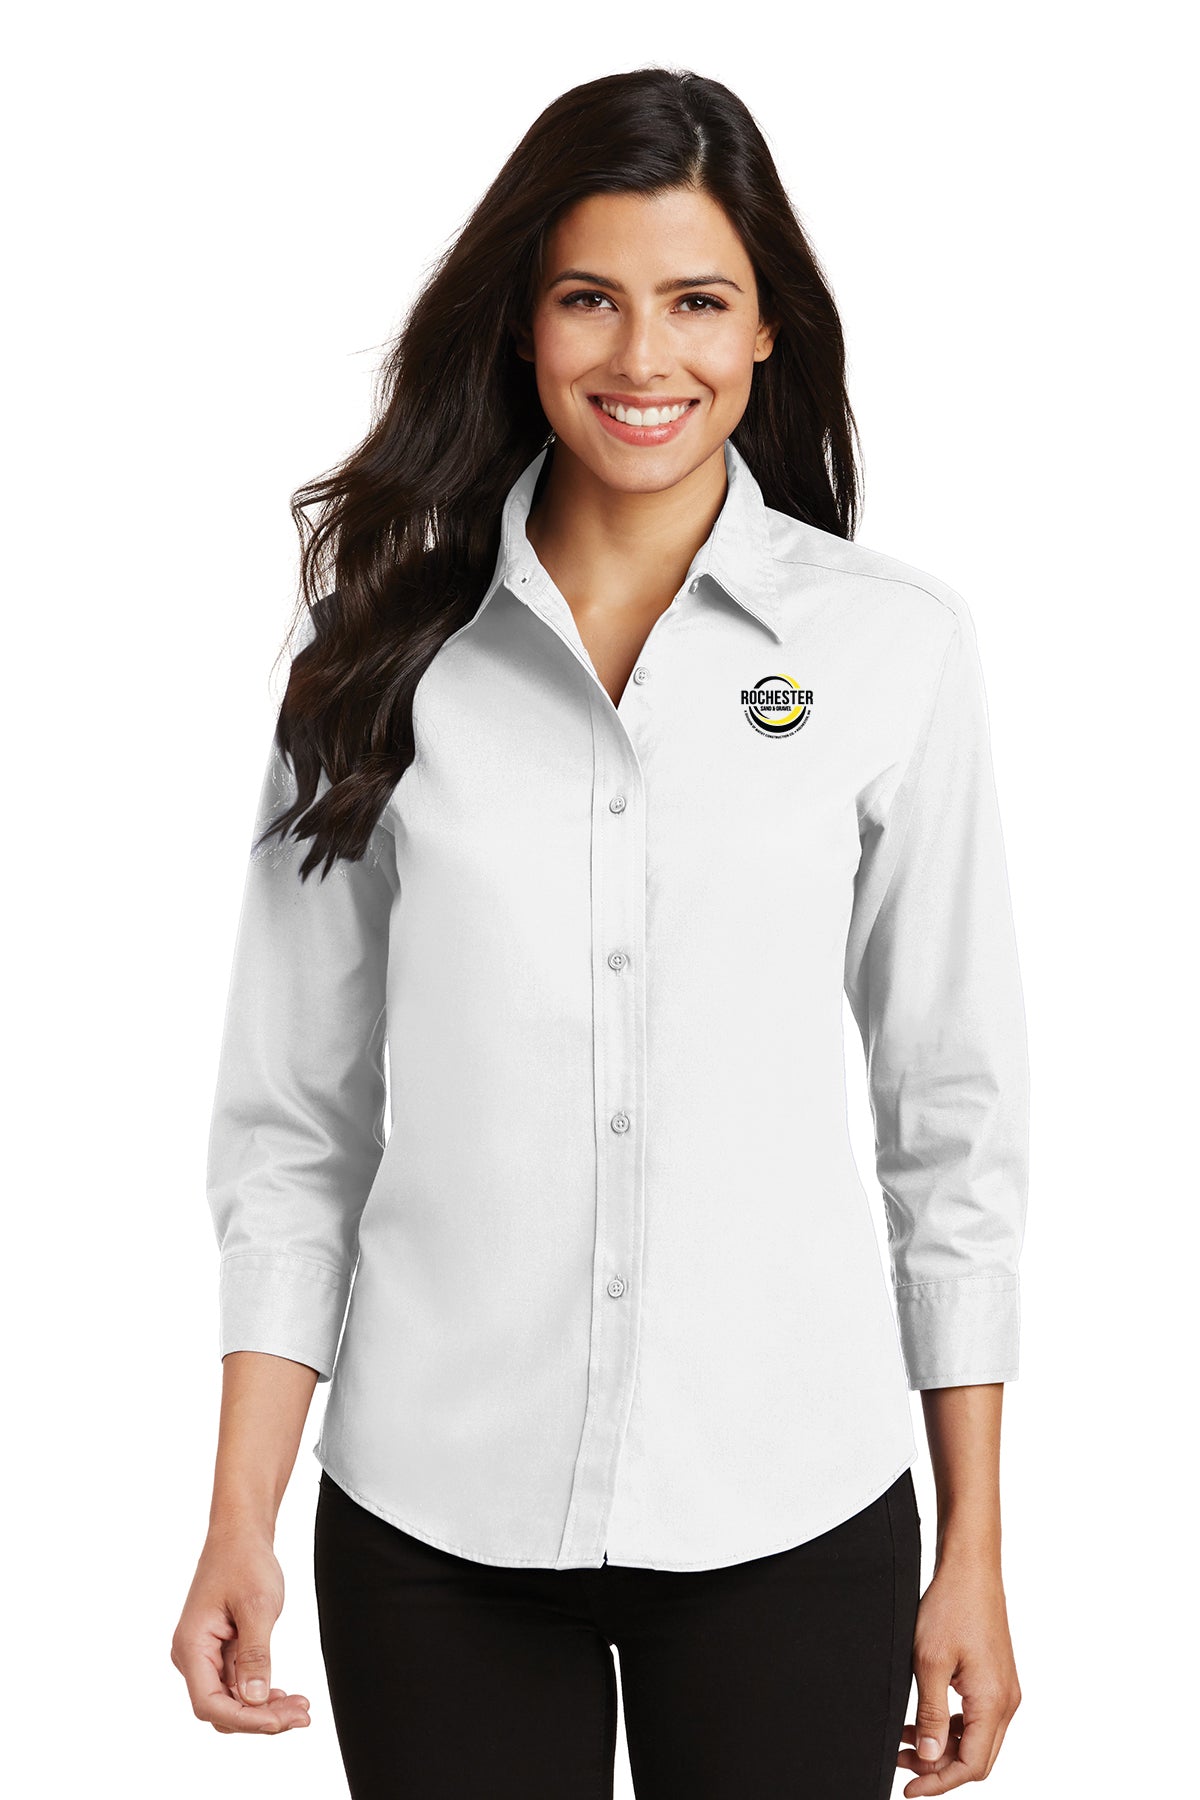 Rochester Sand and Gravel Ladies Button Up Shirt